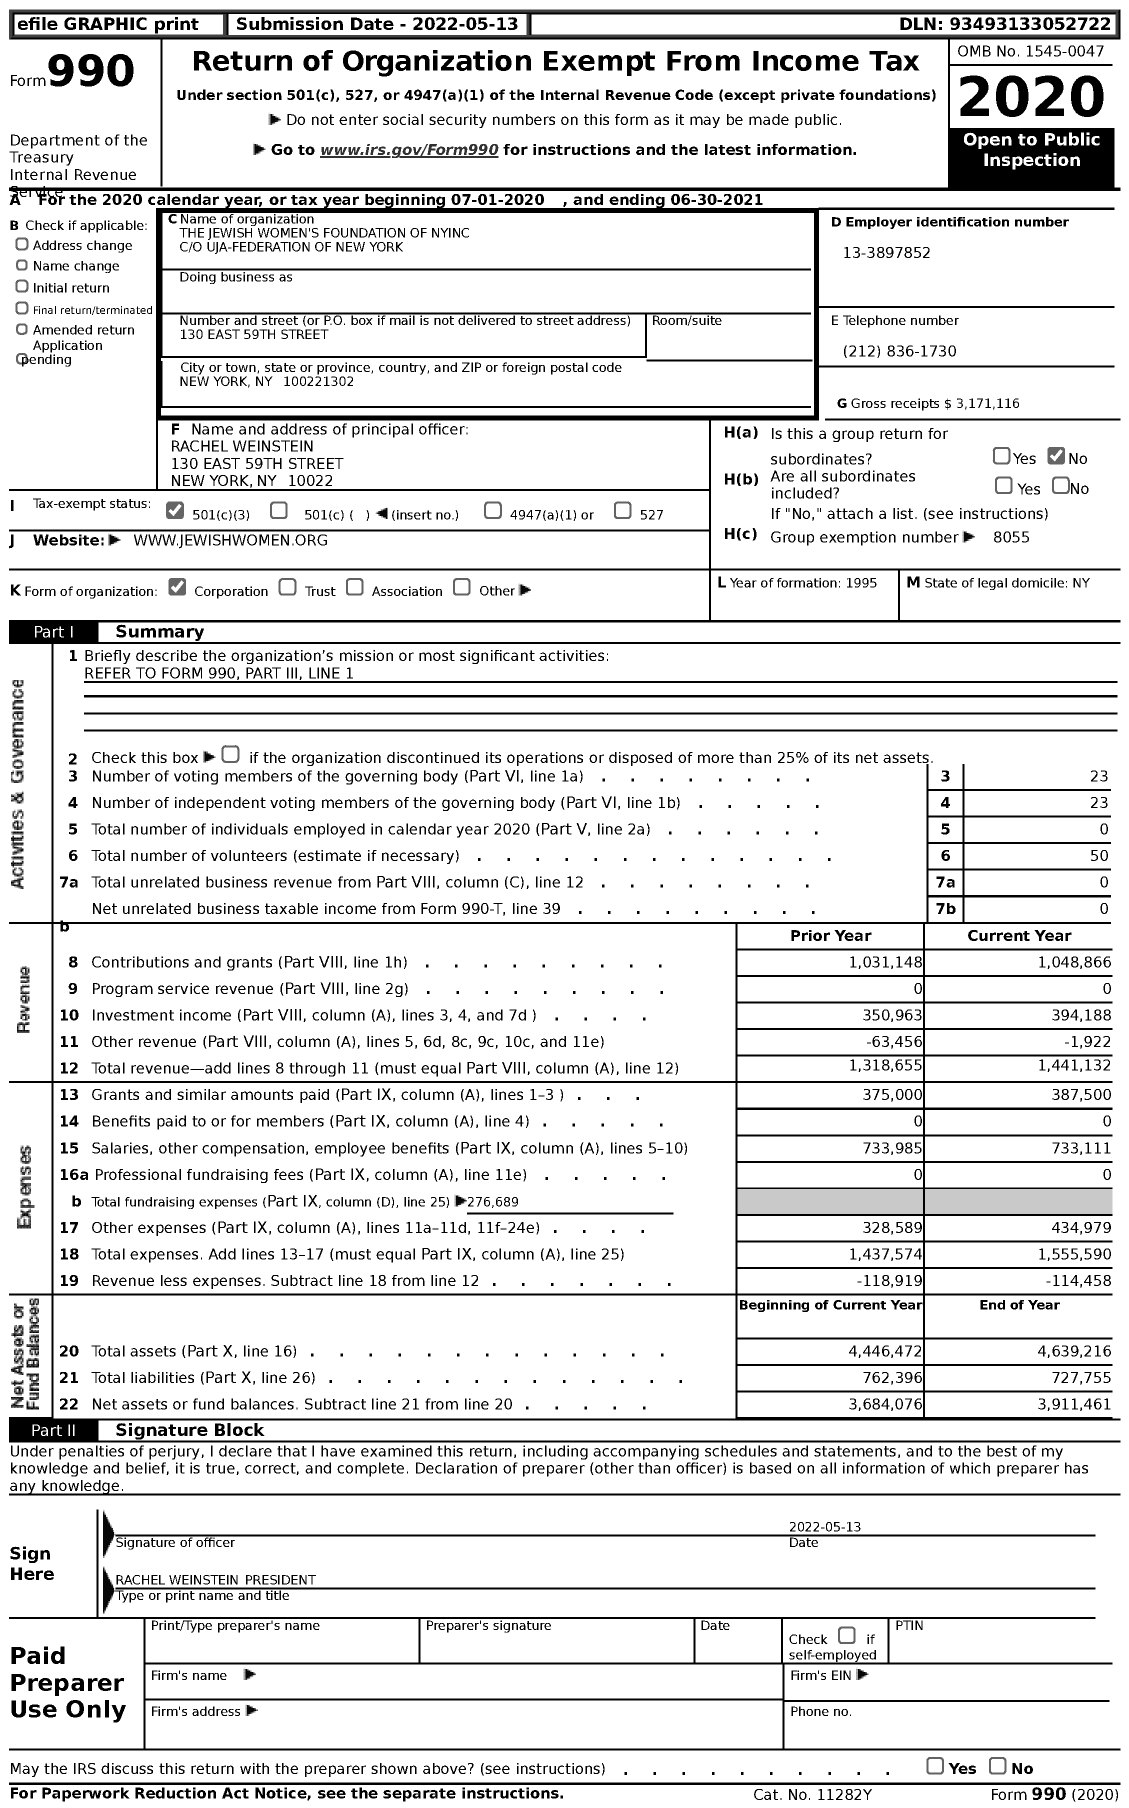 Image of first page of 2020 Form 990 for The Jewish Women's Foundation of Nyinc